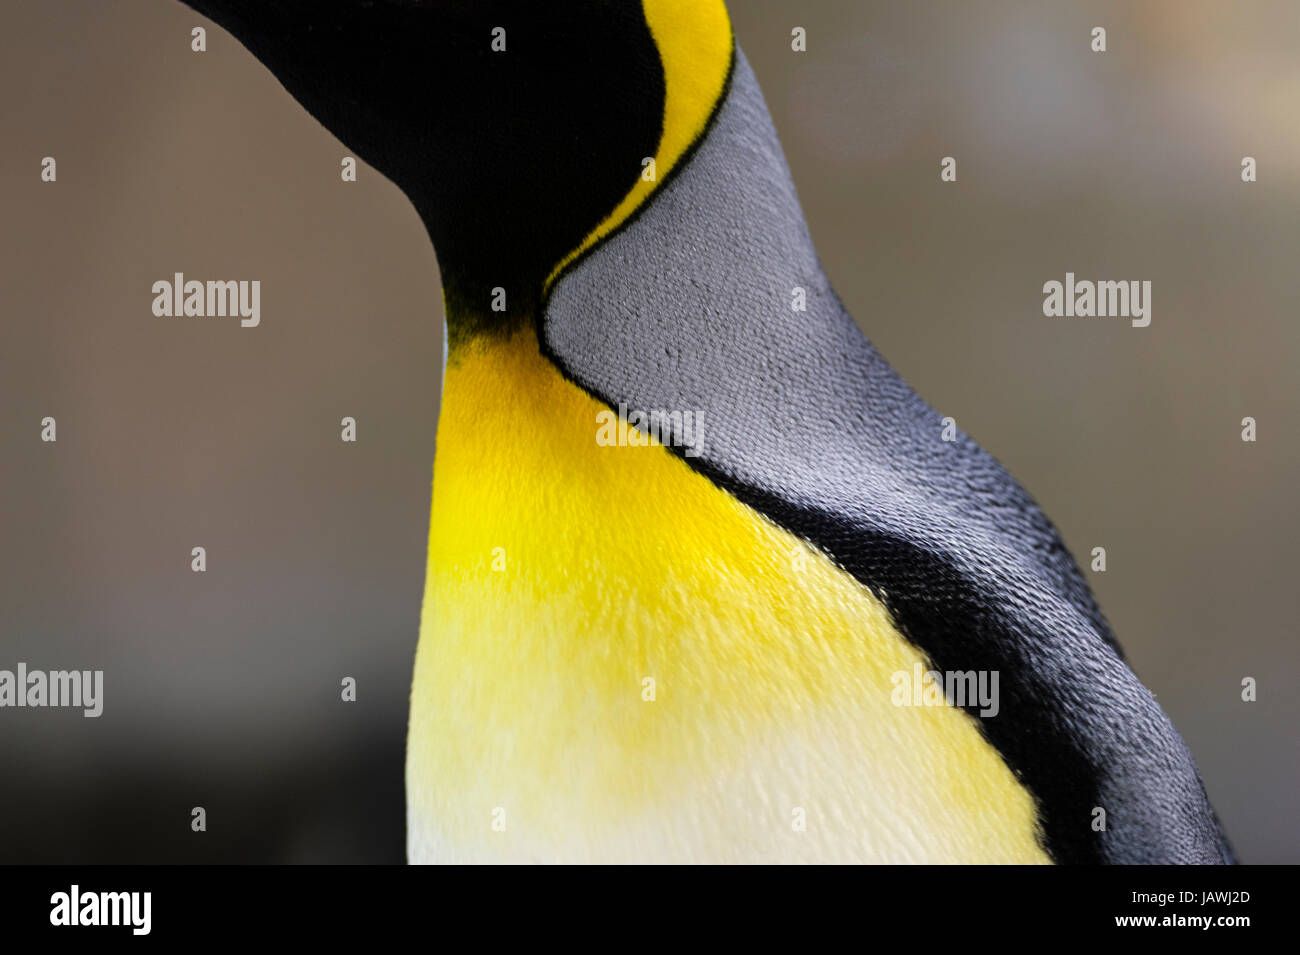 Bright yellow-orange feather plumage on the chest of a King Penguin. Stock Photo